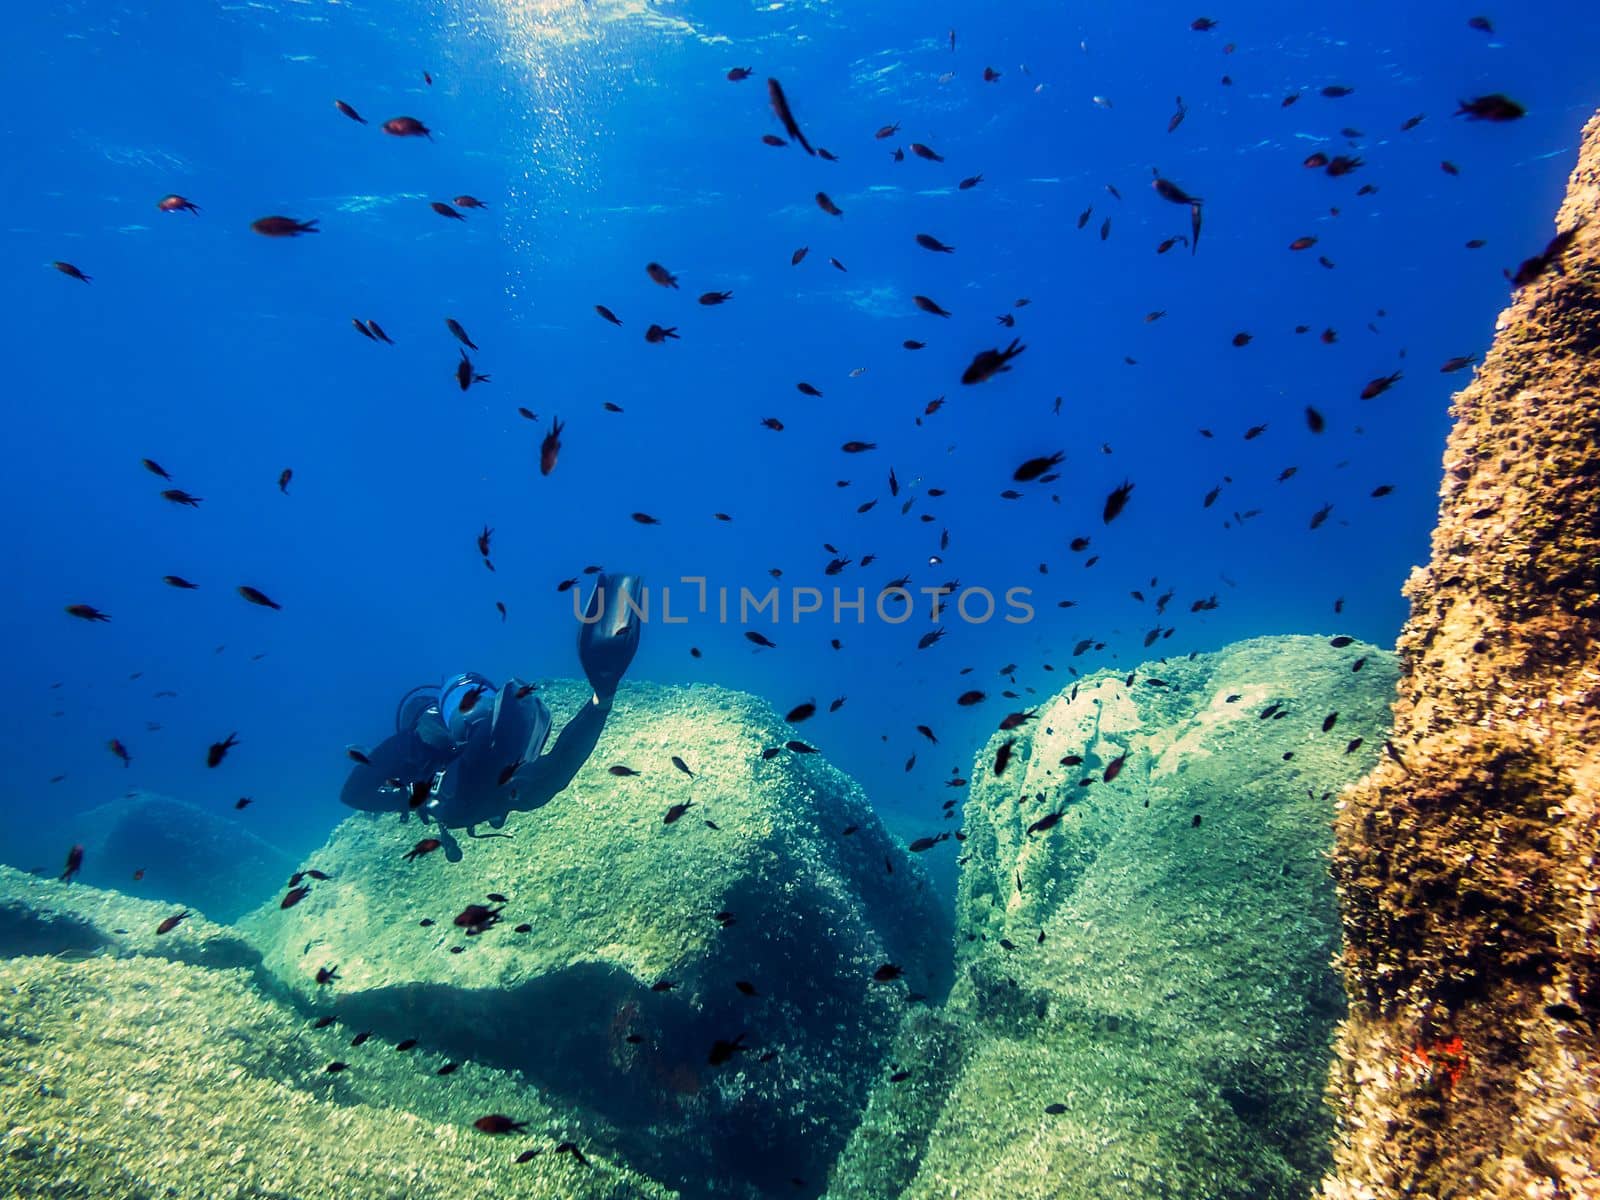 person diving in the blue sea surrounded by fishes by raulmelldo